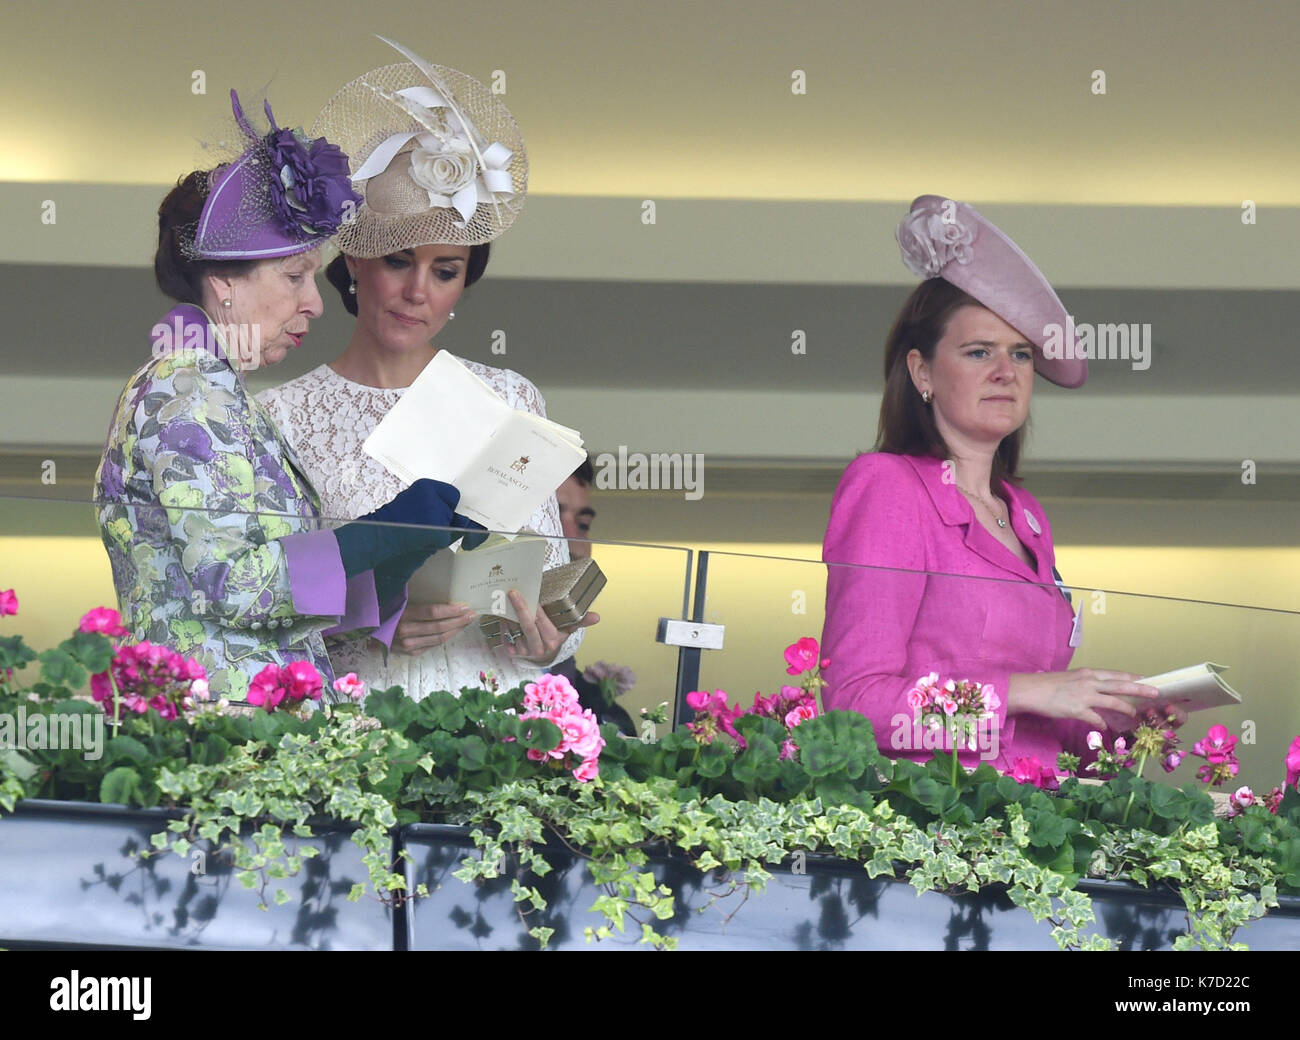 Photo Must Be Credited ©Alpha Press 079965 15/06/2016 Princess Anne and Kate Duchess of Cambridge Katherine Catherine Middleton at Royal Ascot 2016 at Ascot Racecourse in Ascot, Berkshire. Stock Photo